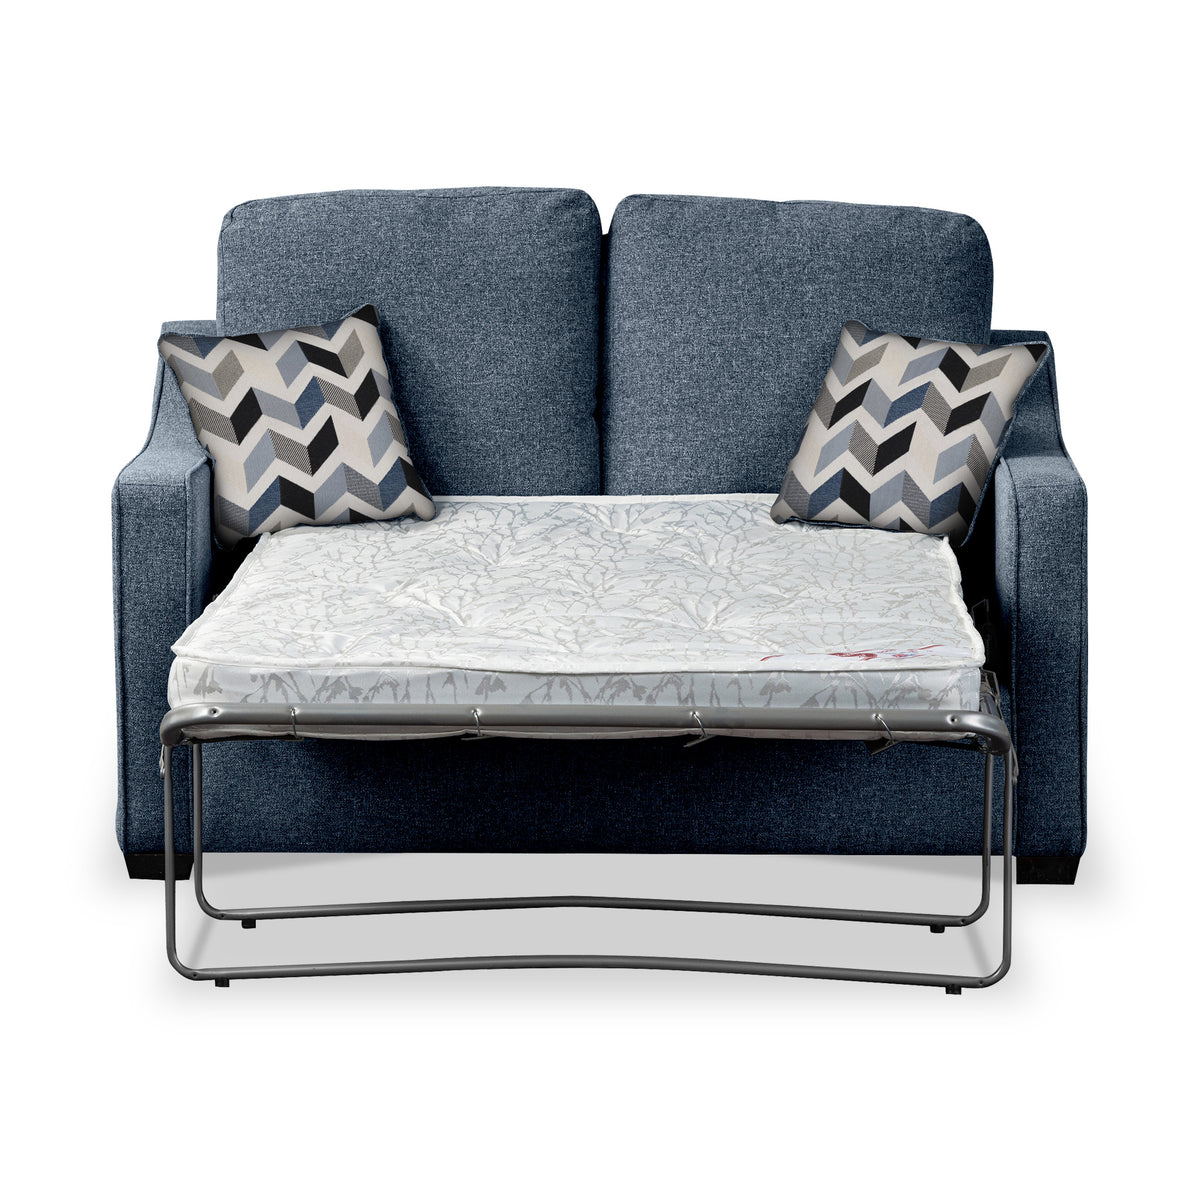 Fenton Midnight Soft Weave 2 Seater Sofabed with Denim Scatter Cushions from Roseland Furniture